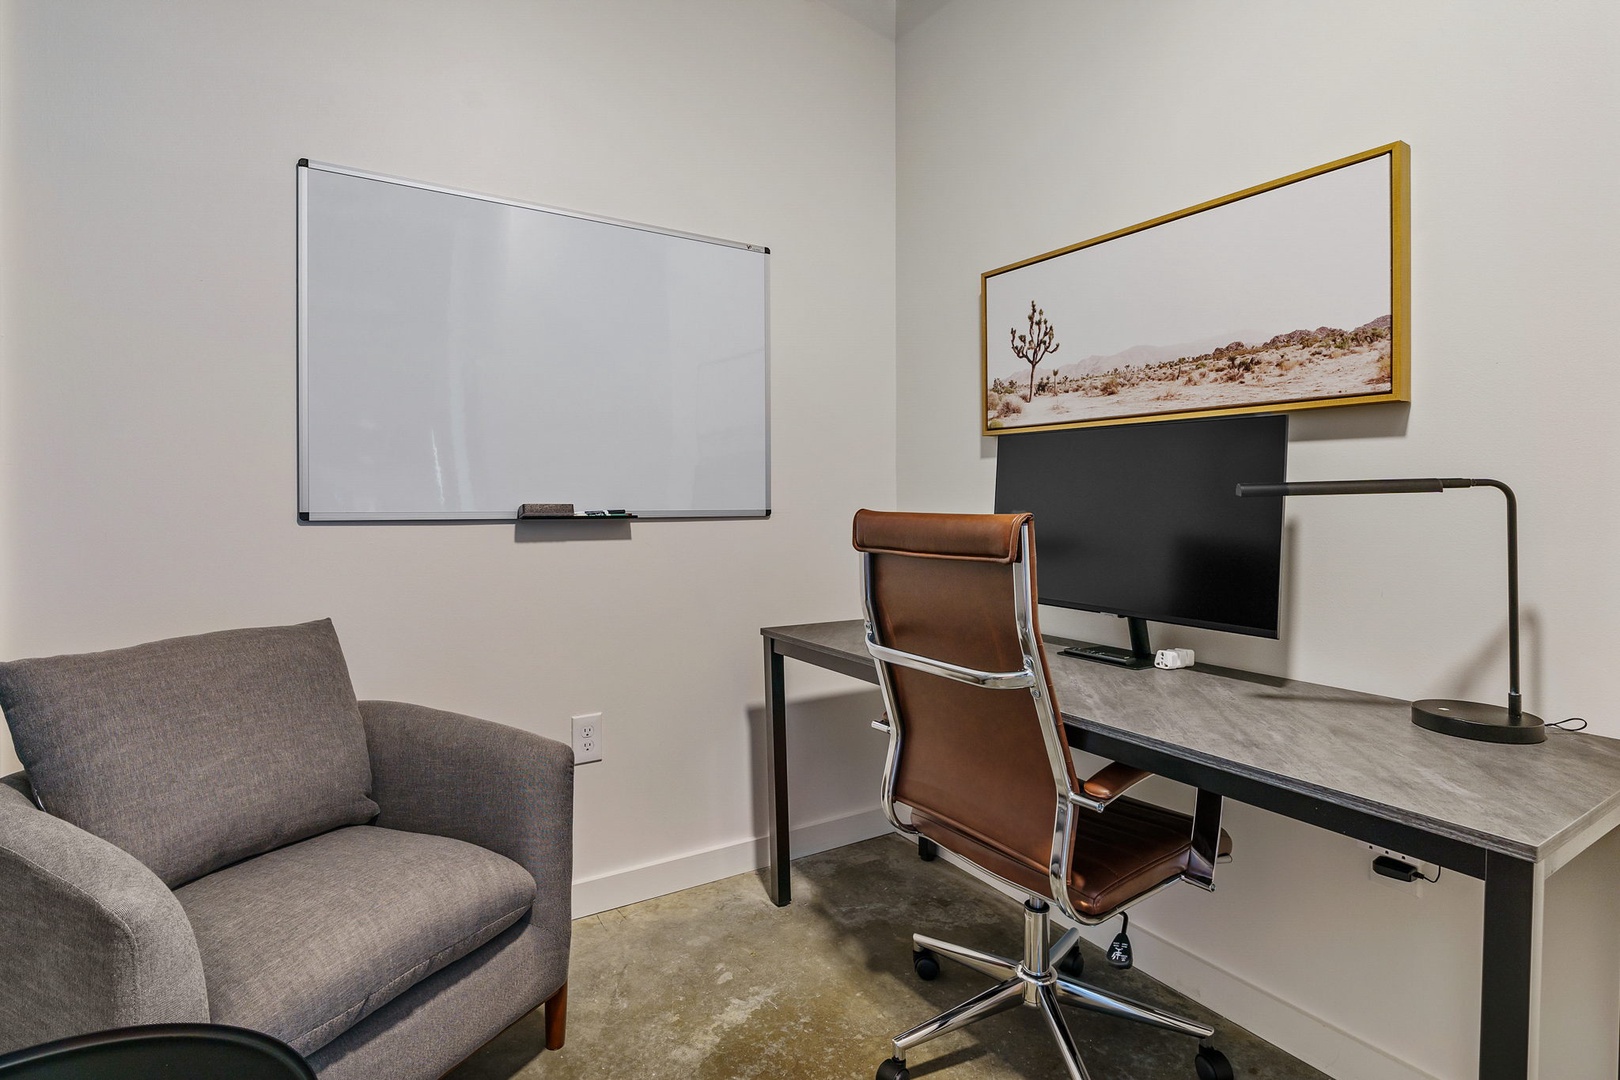 Designed for the digital professional: a spacious and thoughtfully laid out office space.